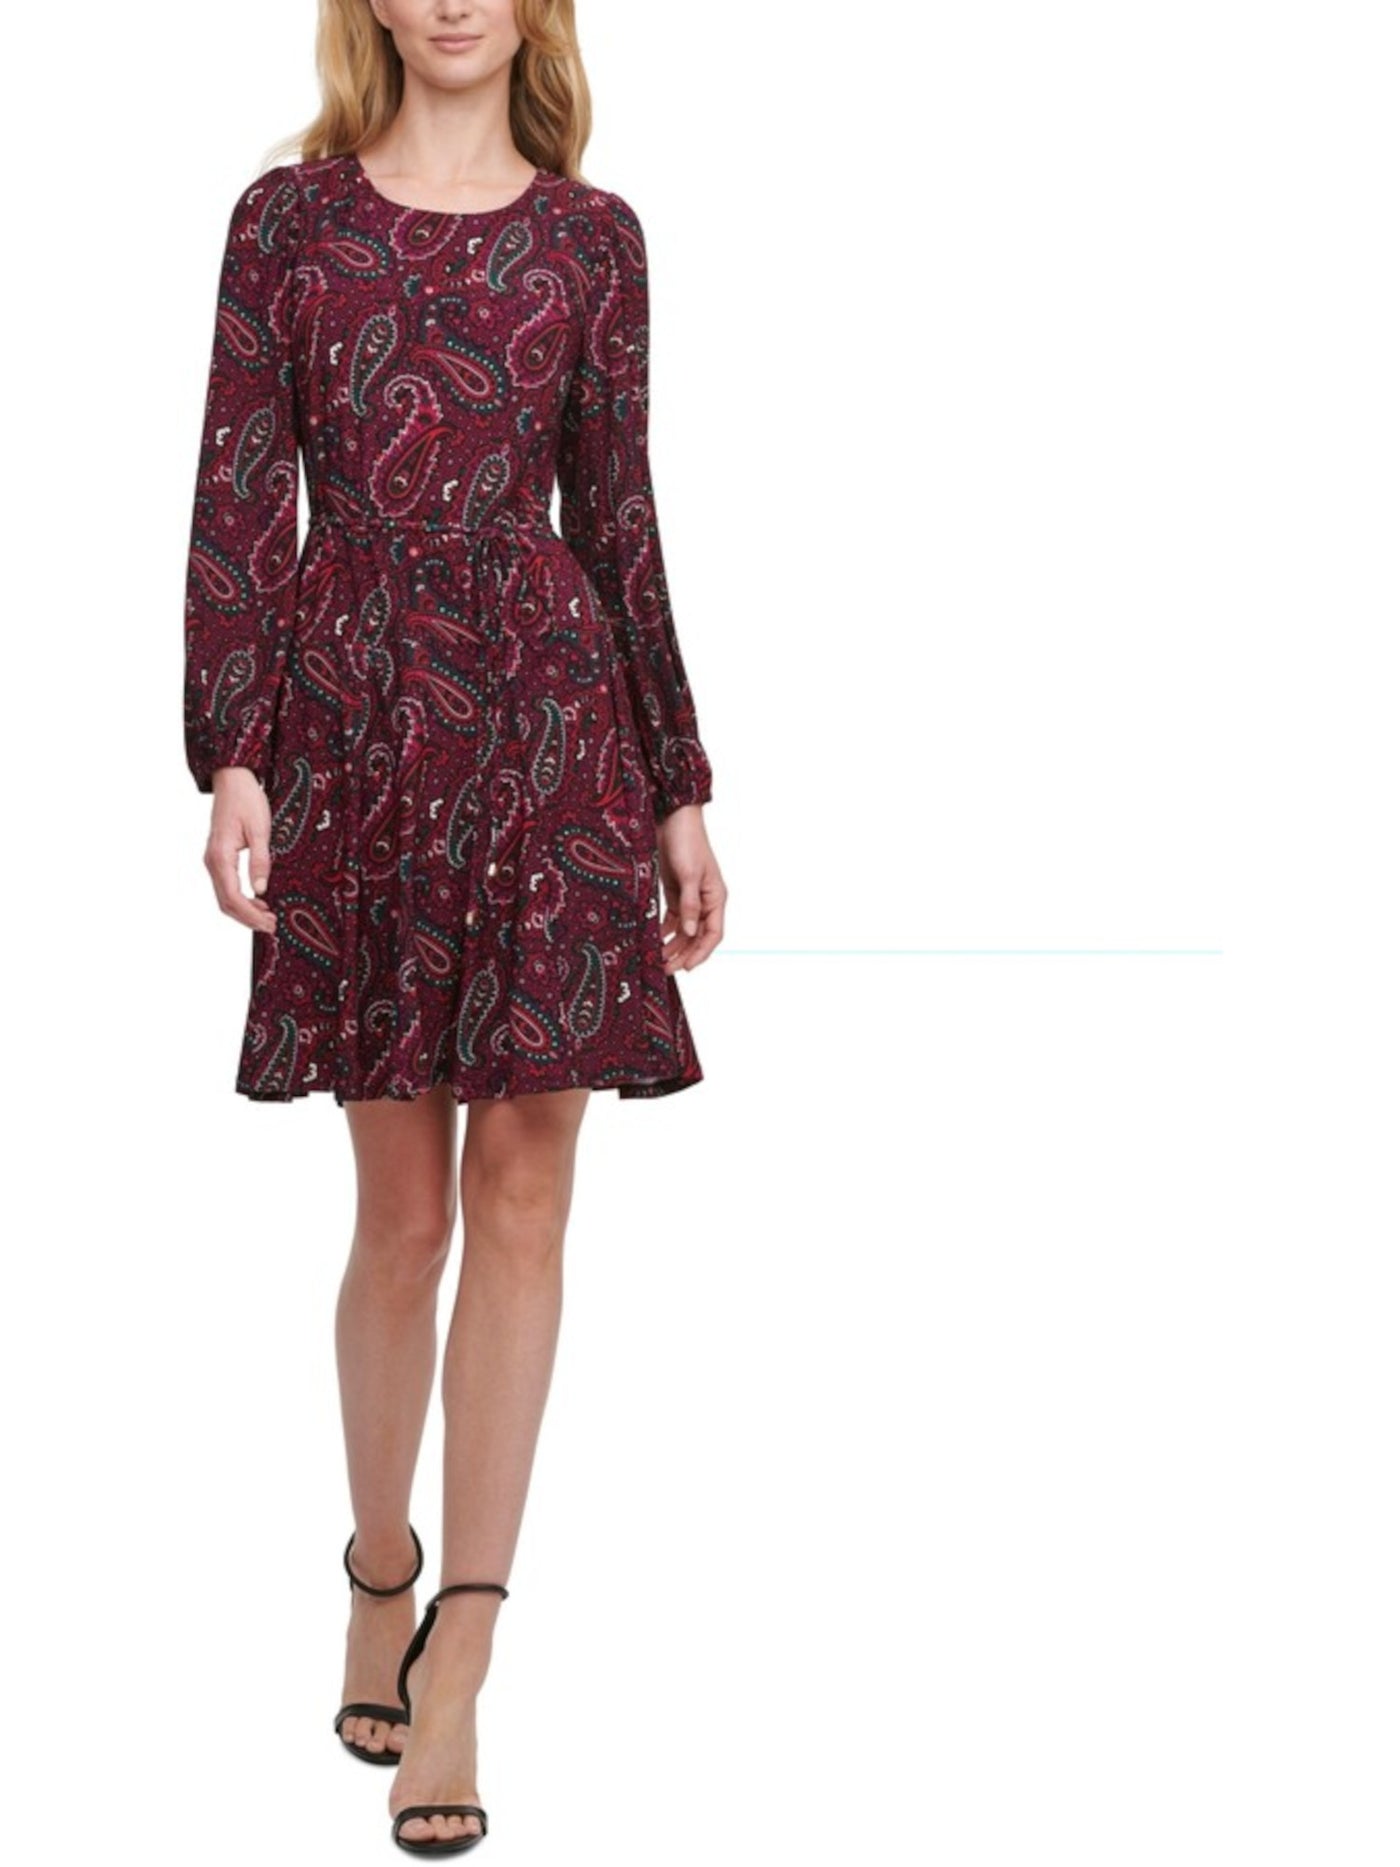 TOMMY HILFIGER Womens Burgundy Stretch Zippered Belted Paisley Long Sleeve Crew Neck Knee Length Wear To Work Fit + Flare Dress 2